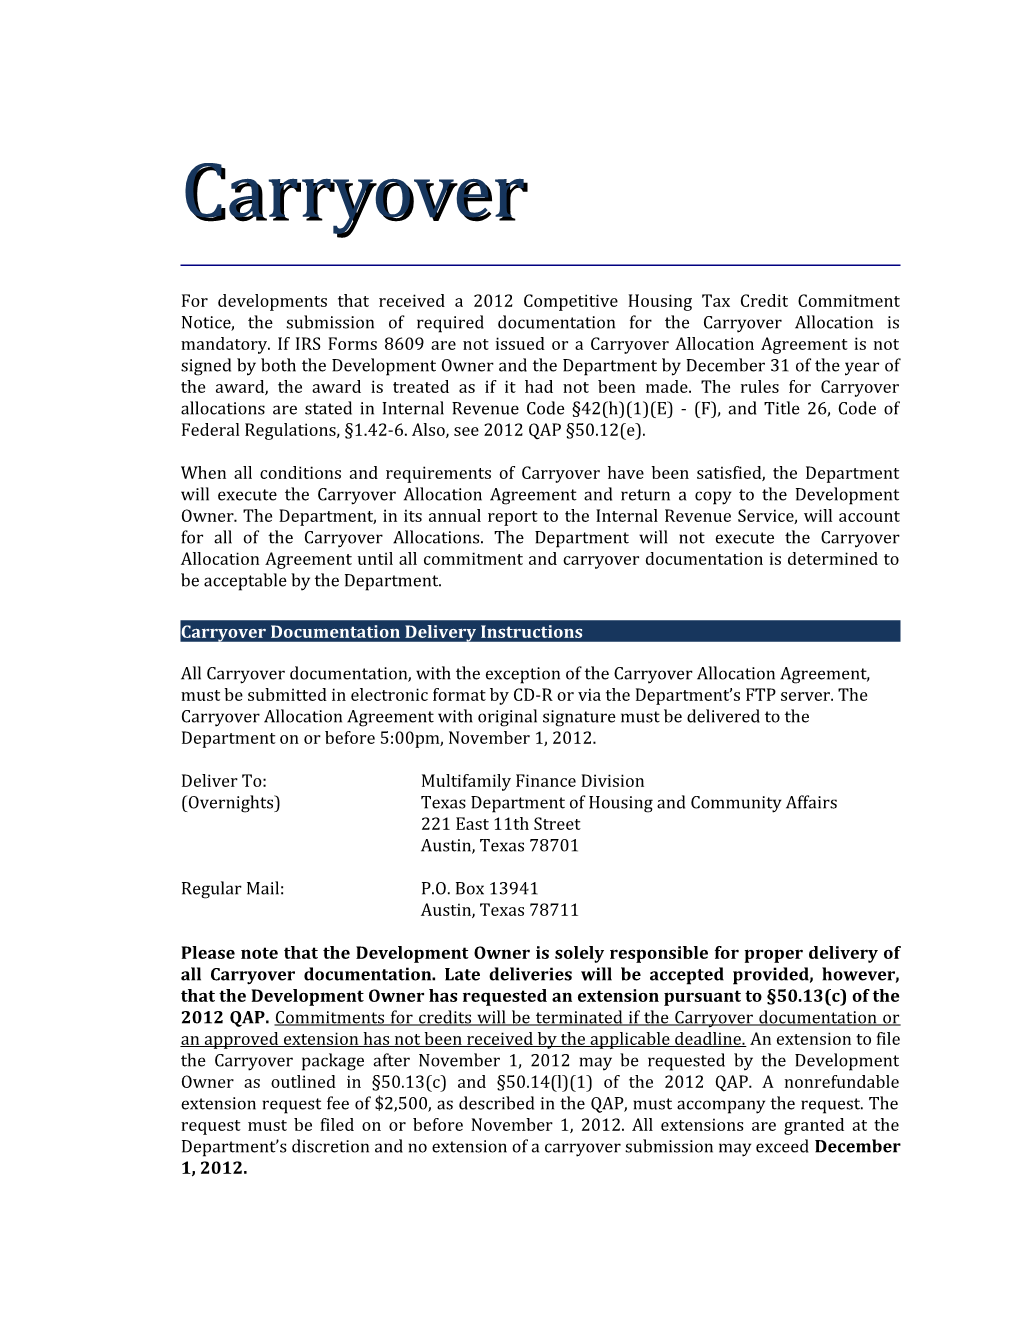 Carryover Documentation Delivery Instructions